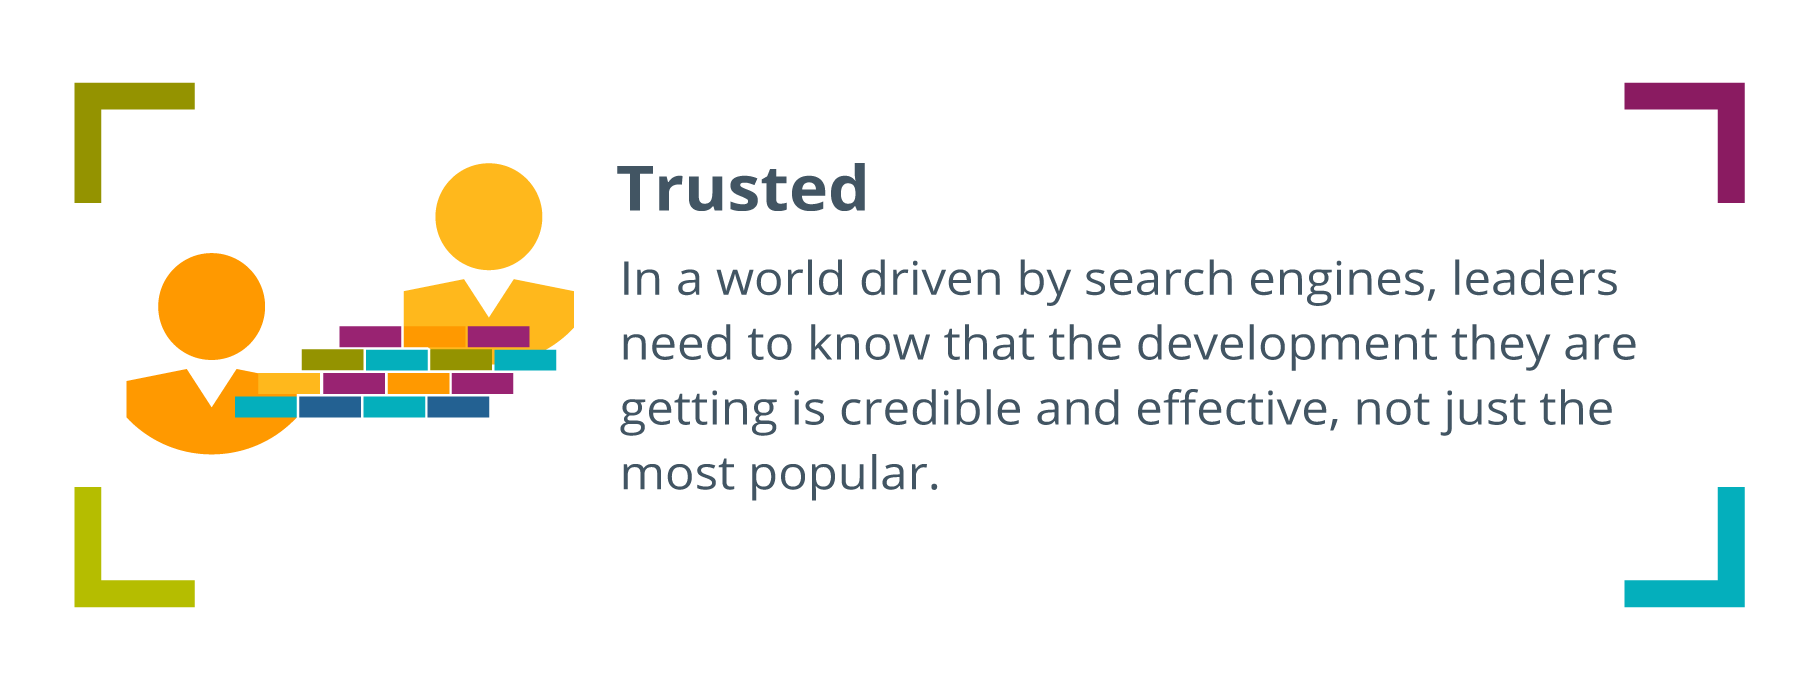 an icon of two people with a bridge of colorful bricks connecting them, and on the right it says: Trusted: In a world driven by search engines, leaders need to know that the development they are getting is credible and effective, not just the most popular.